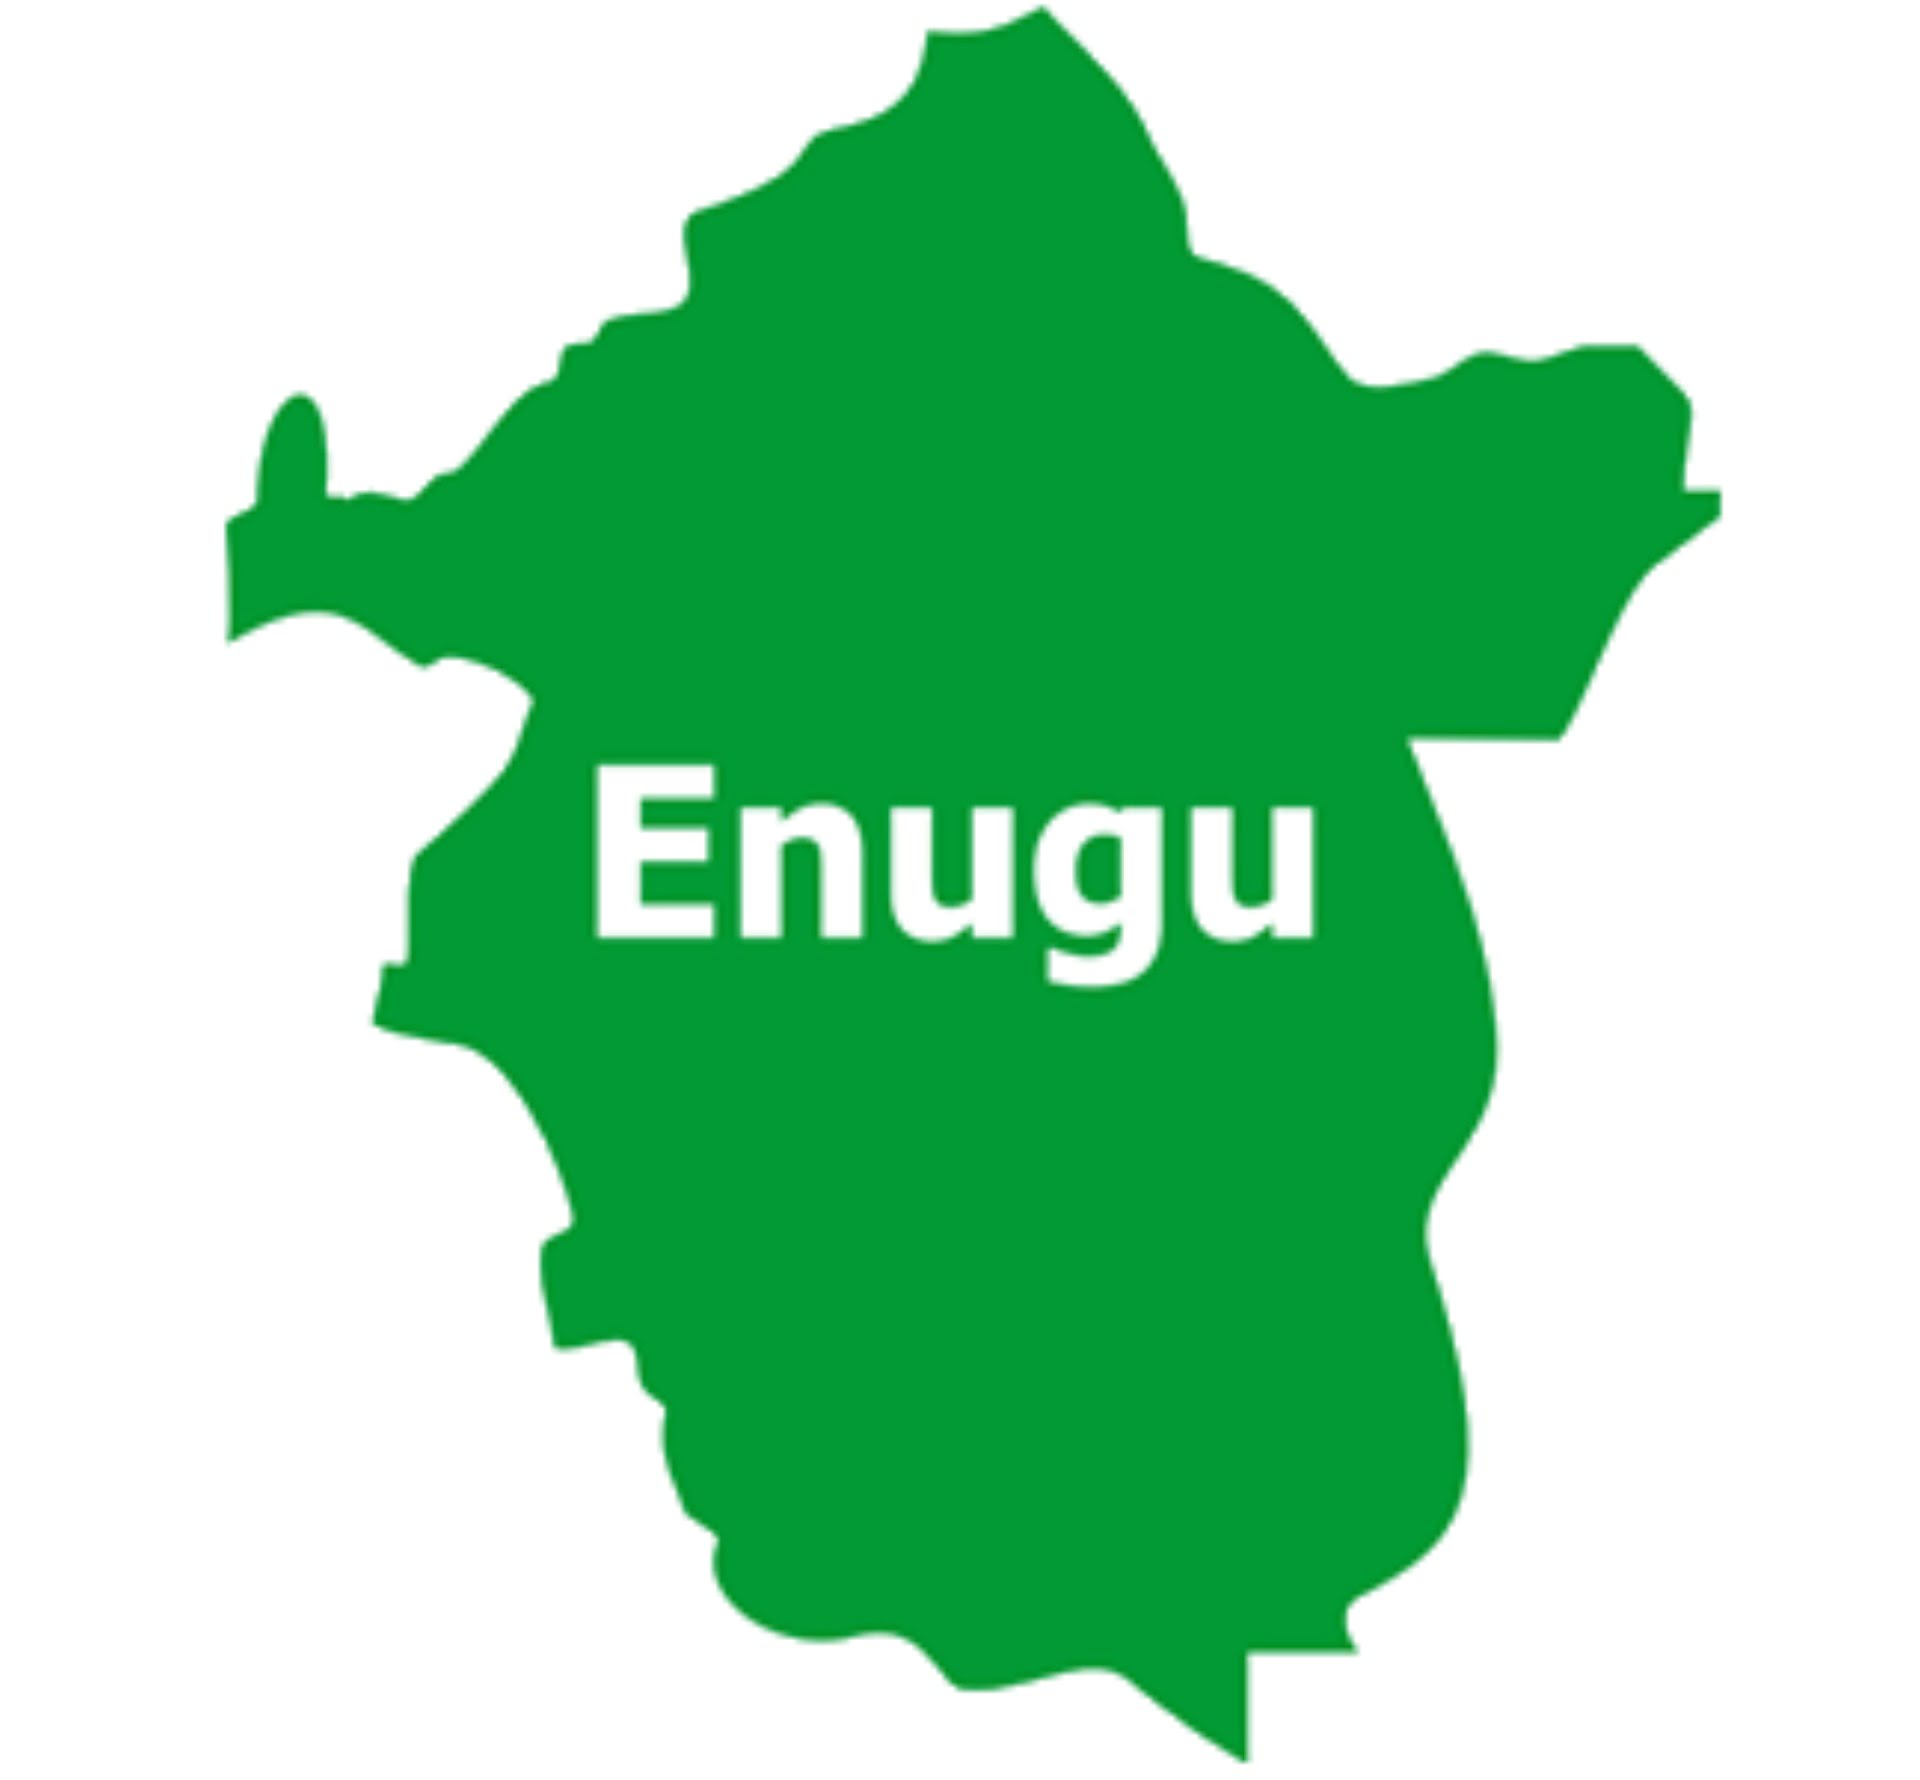 nigeria news yellow fever cause of unusual deaths in enugu community state govt